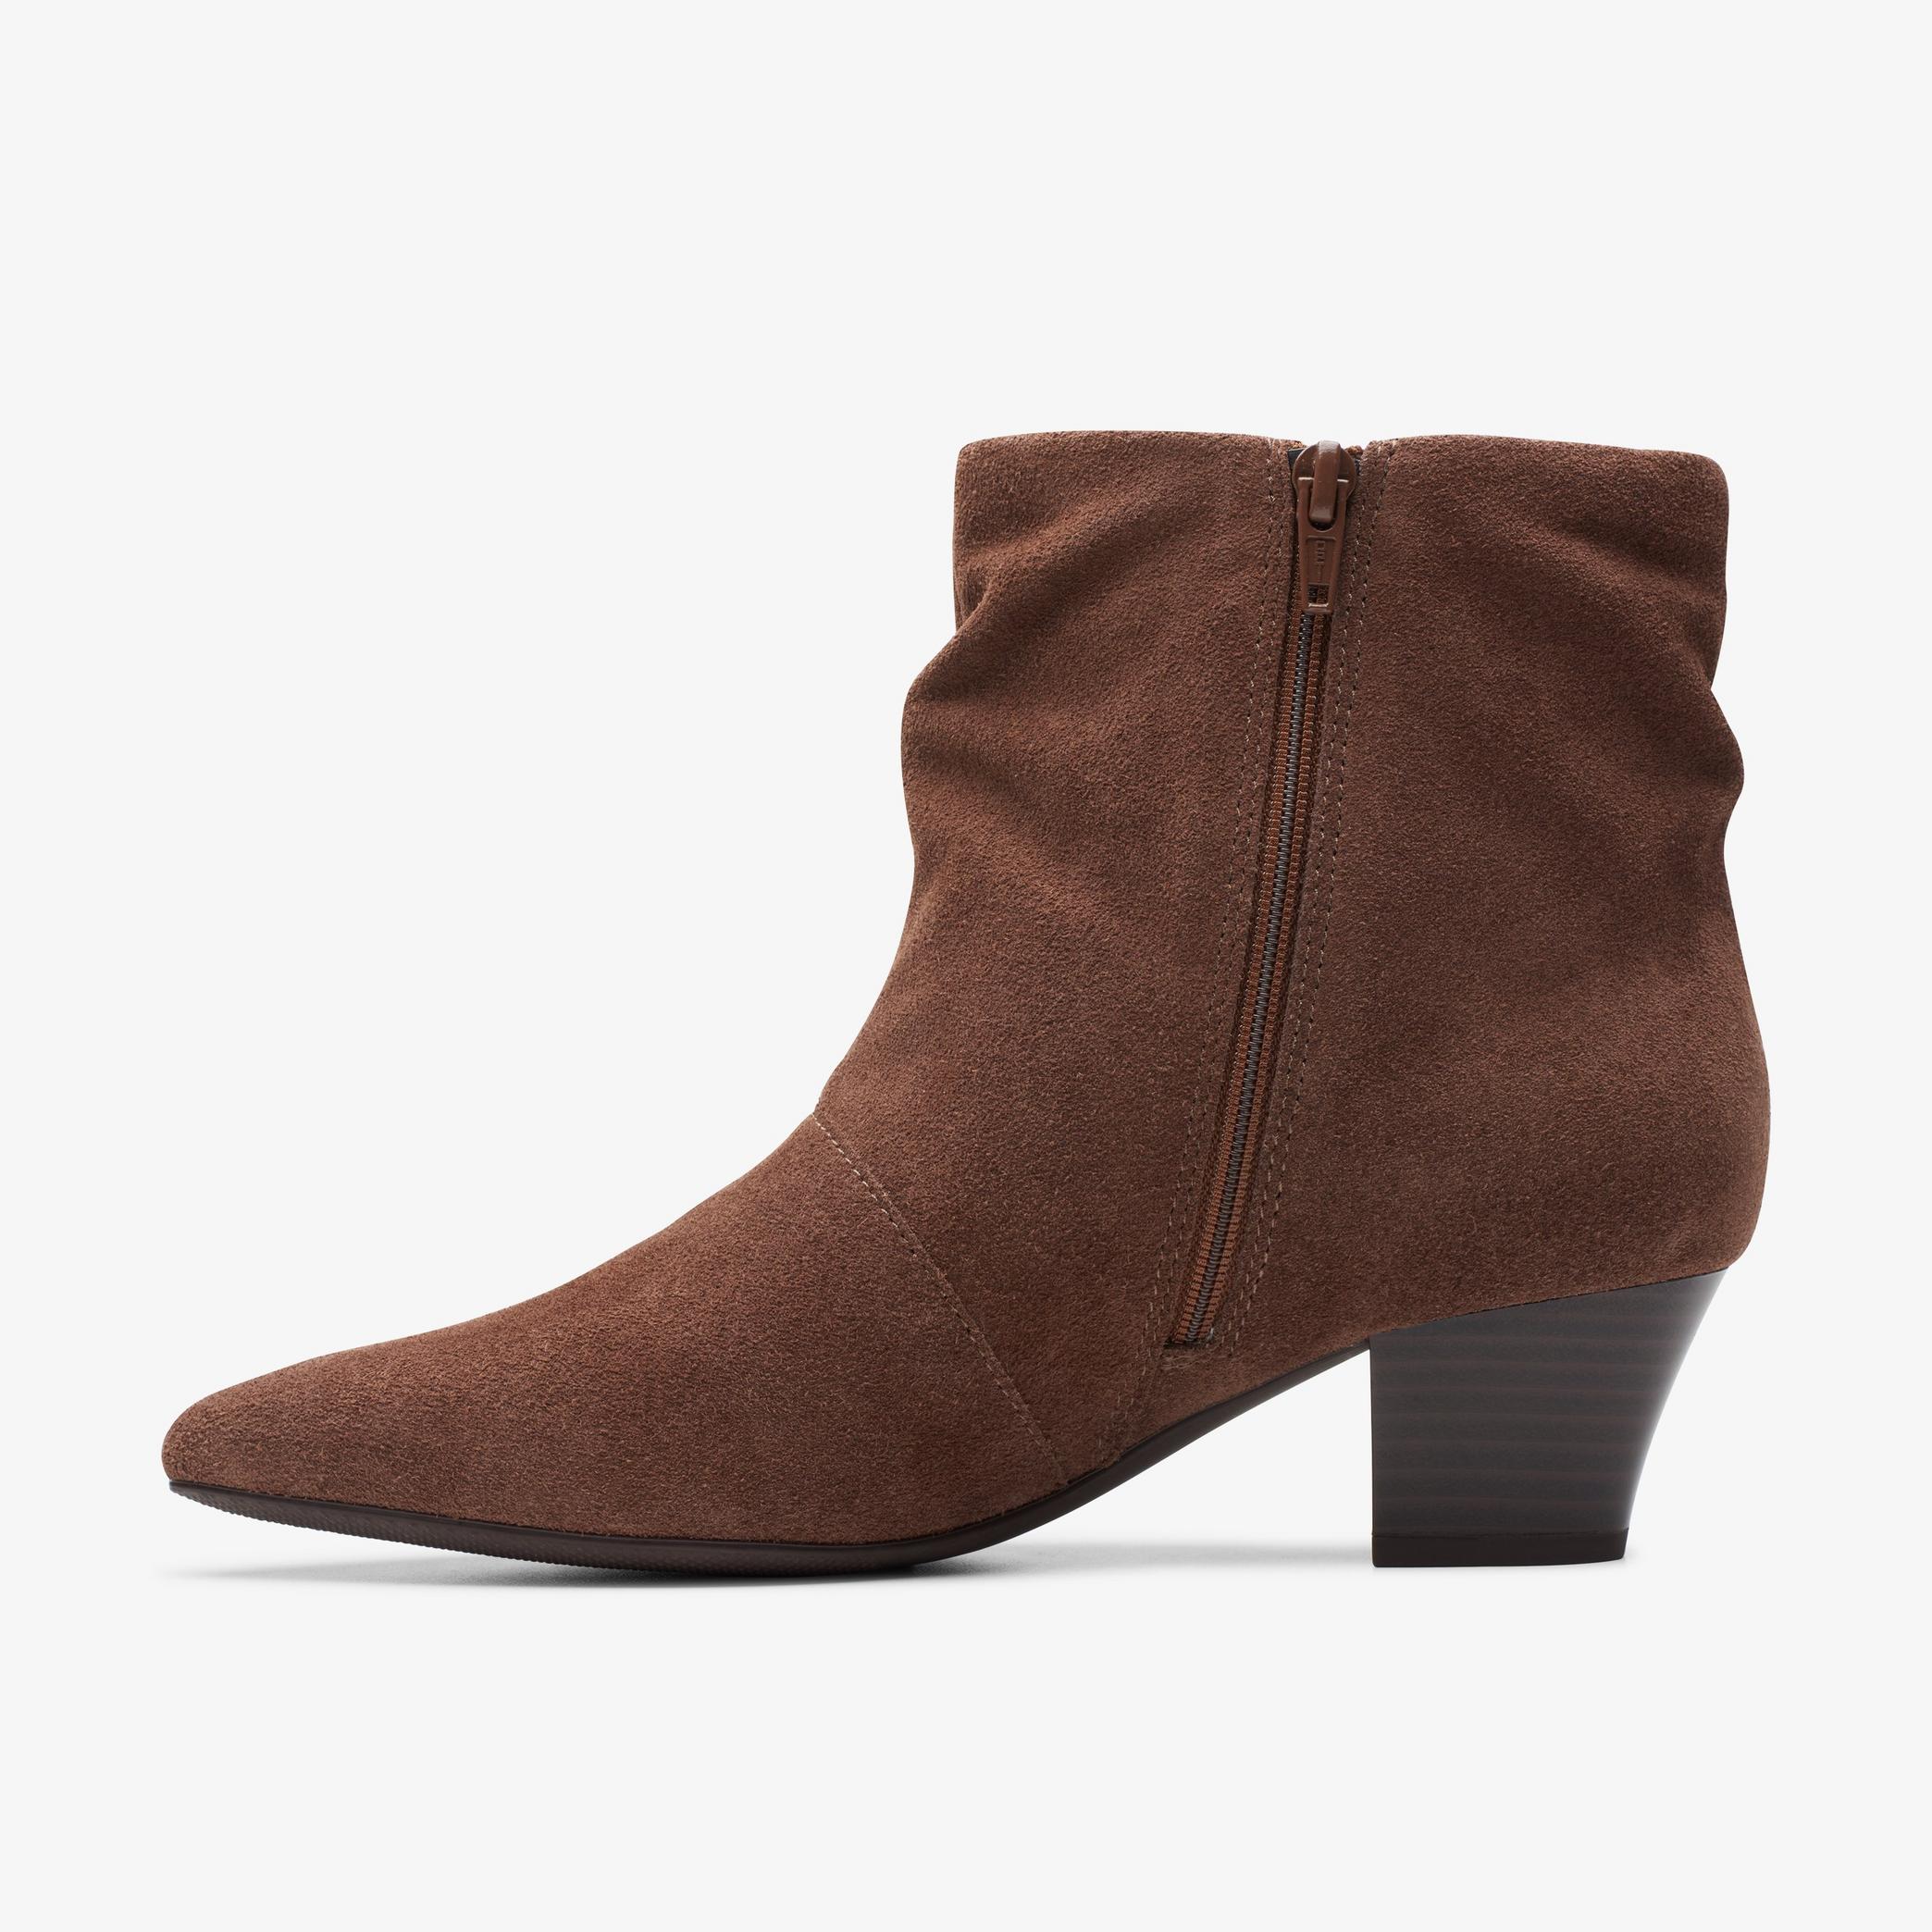 Teresa Skip Taupe Suede Ankle Boots, view 2 of 6